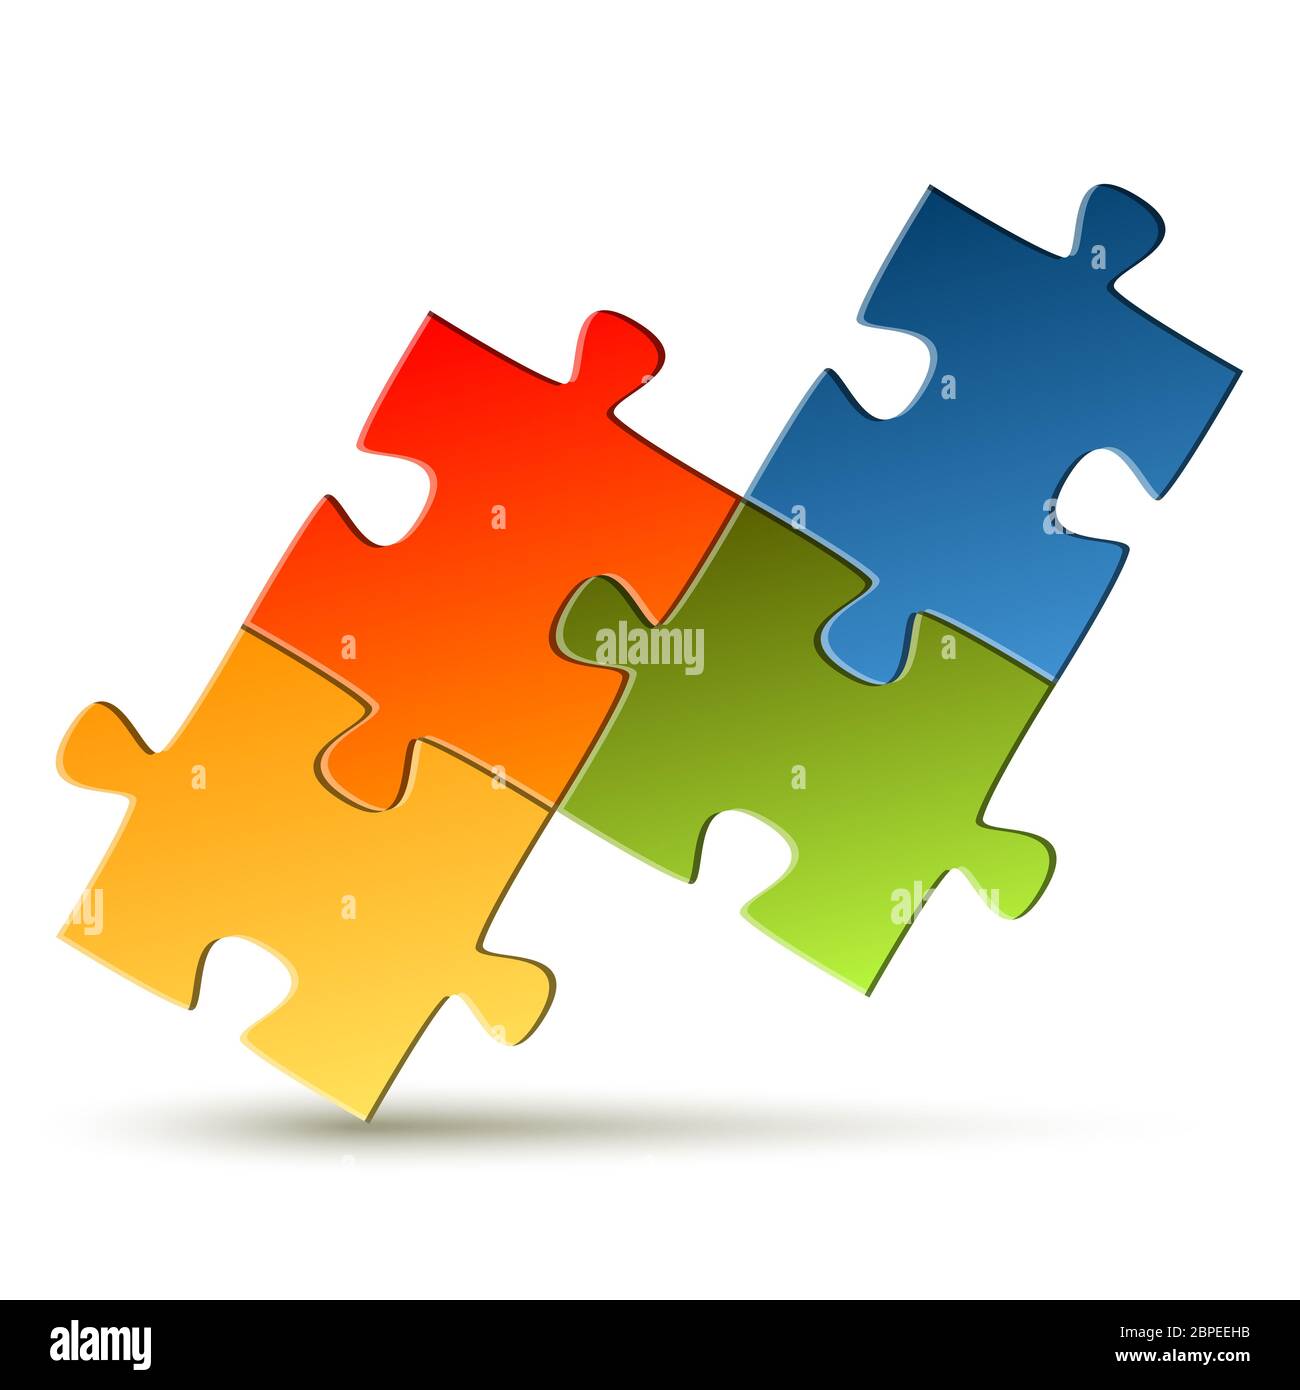 puzzle with four colored parts for teamwork symbolism Stock Photo